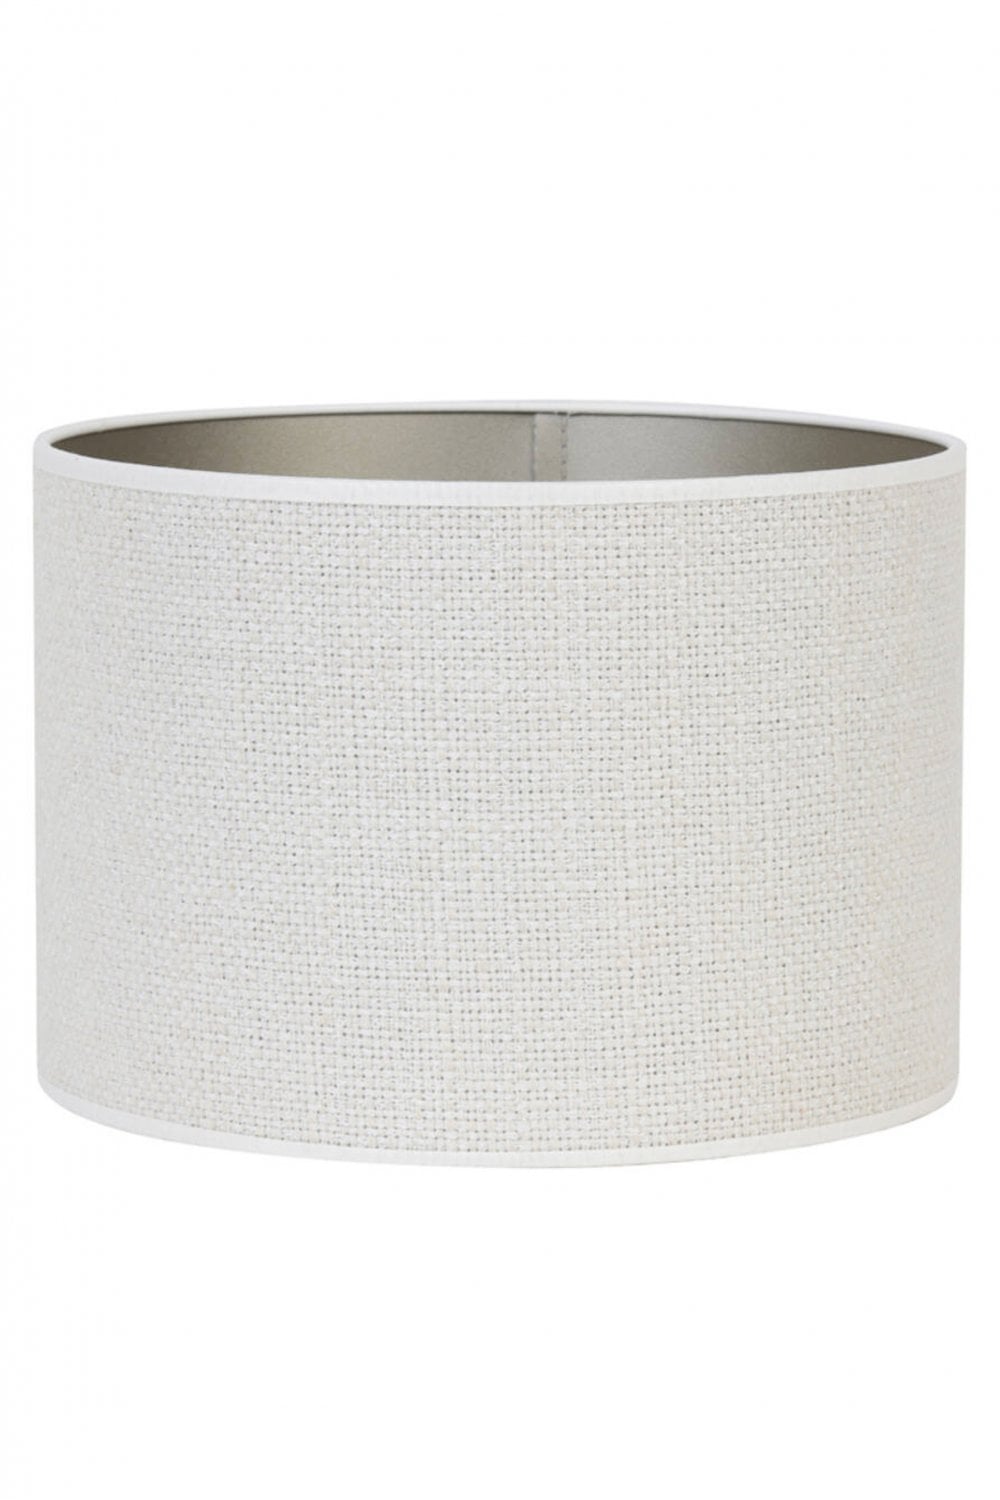 The Home Collection Cylinder Shade In Saverna Egg White